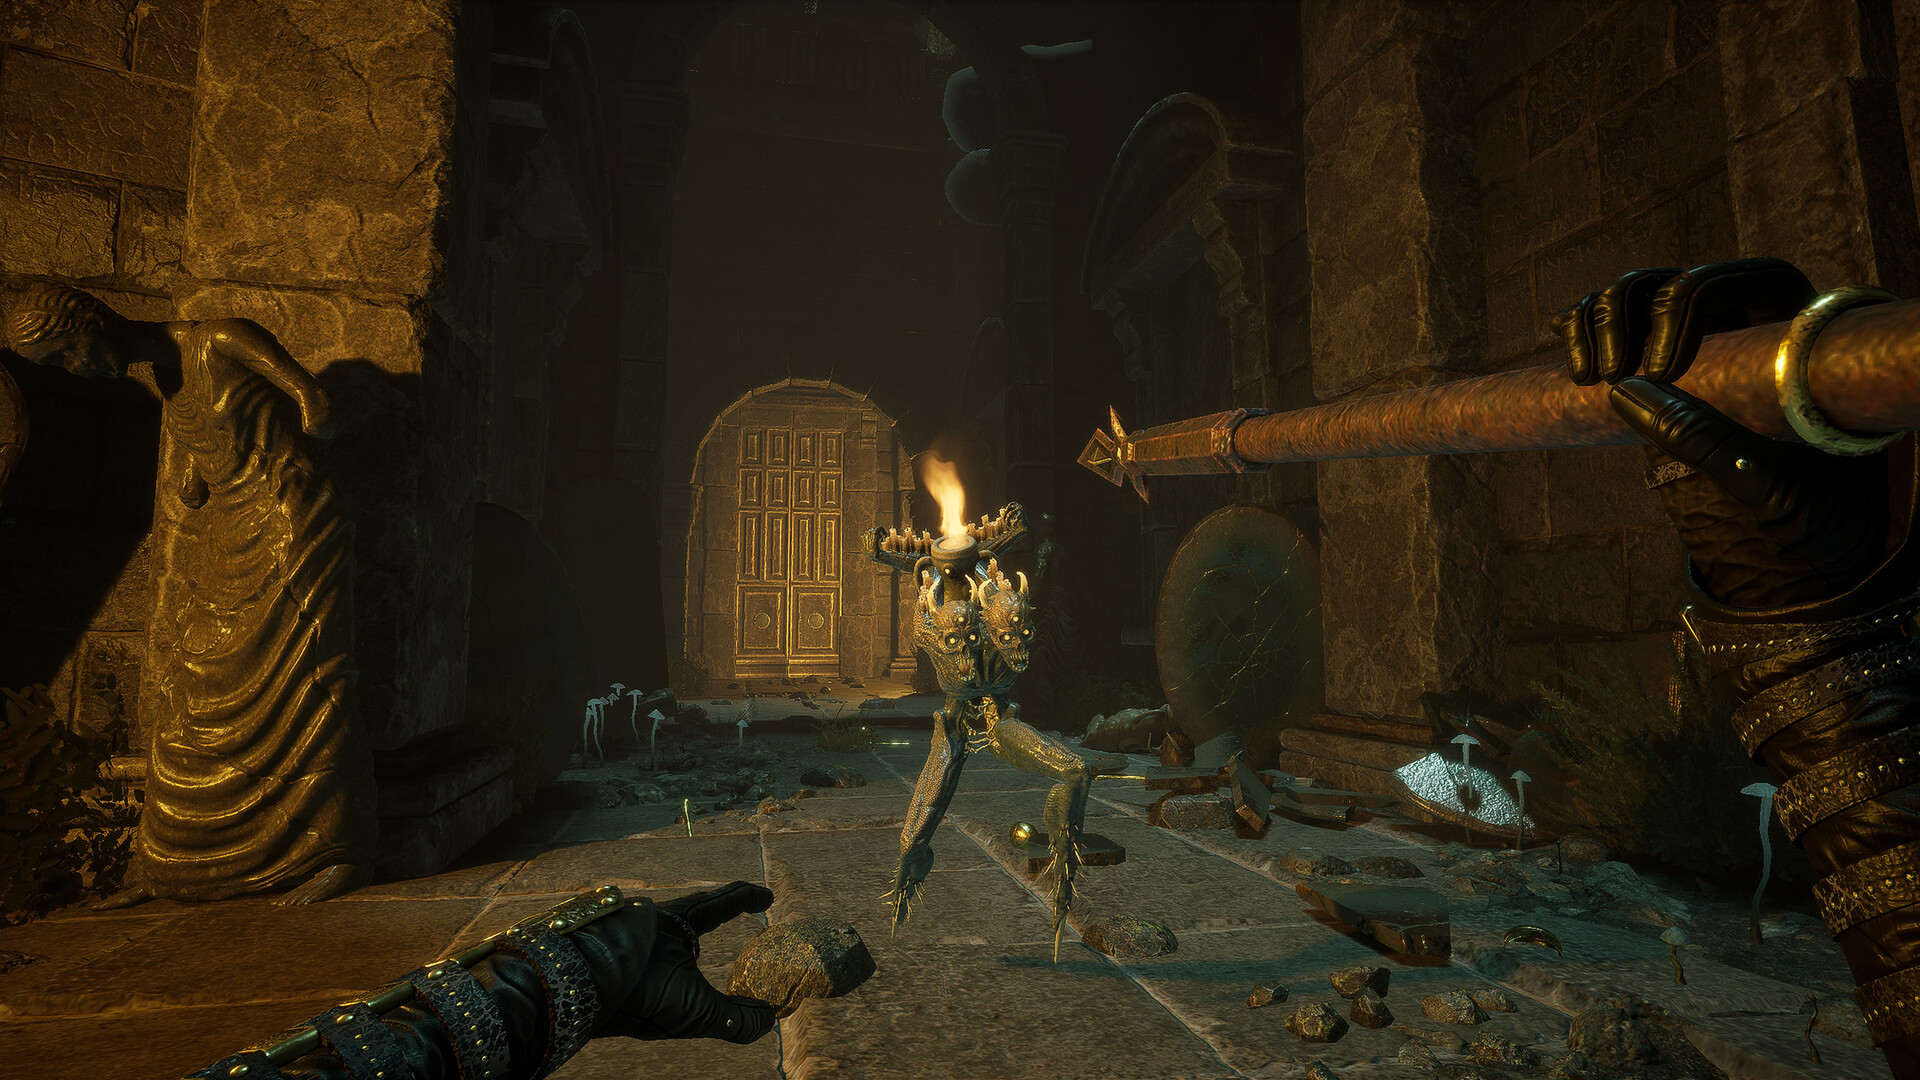 aiming a javelin at a skeleton monster in darkened hallway